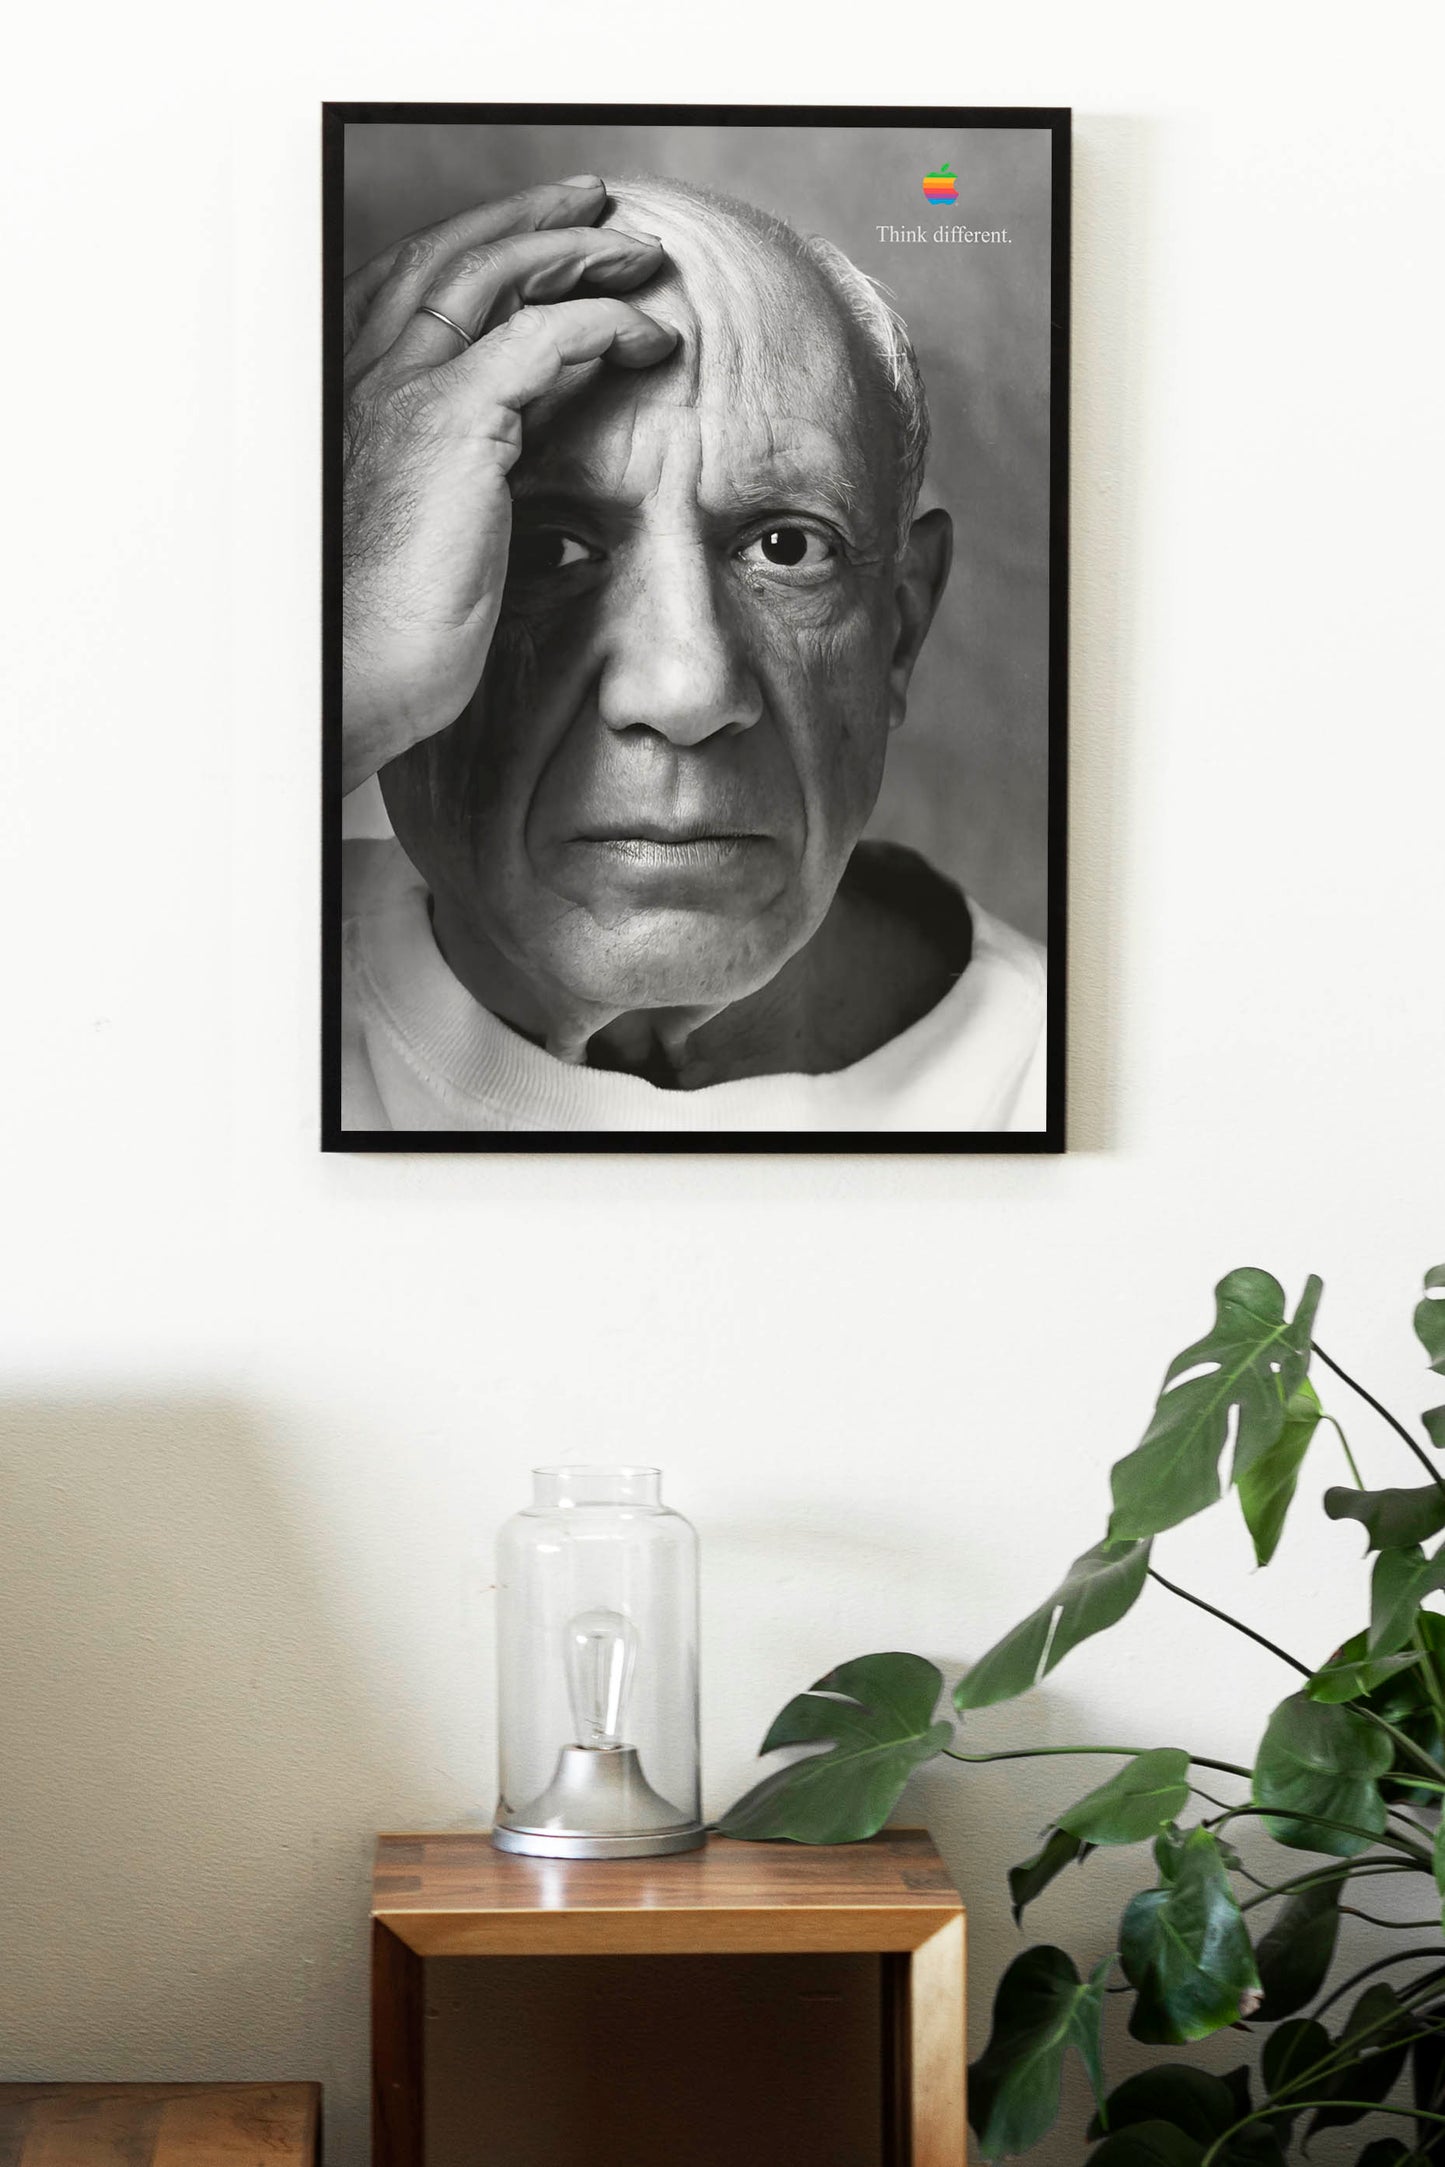 Apple Pablo Picasso "Think Different" Poster